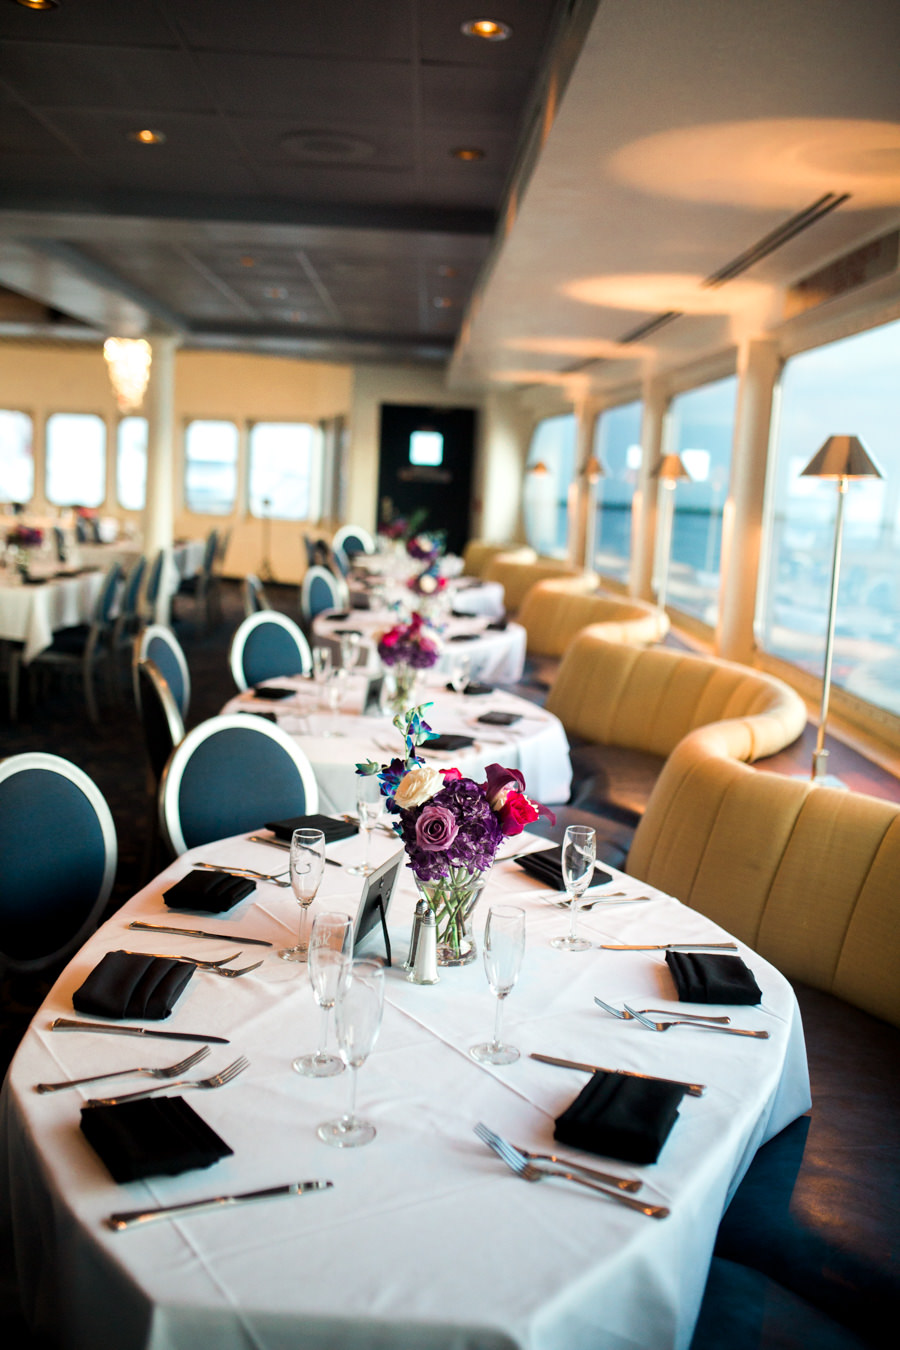 Yacht Dining Room Wedding Reception with Black LInens, and Small Purple, White, Fuchsia, Blue and Red Floral Centerpieces in Glass Vases | Tampa Bay Nautical Wedding Venue The Yacht Starship